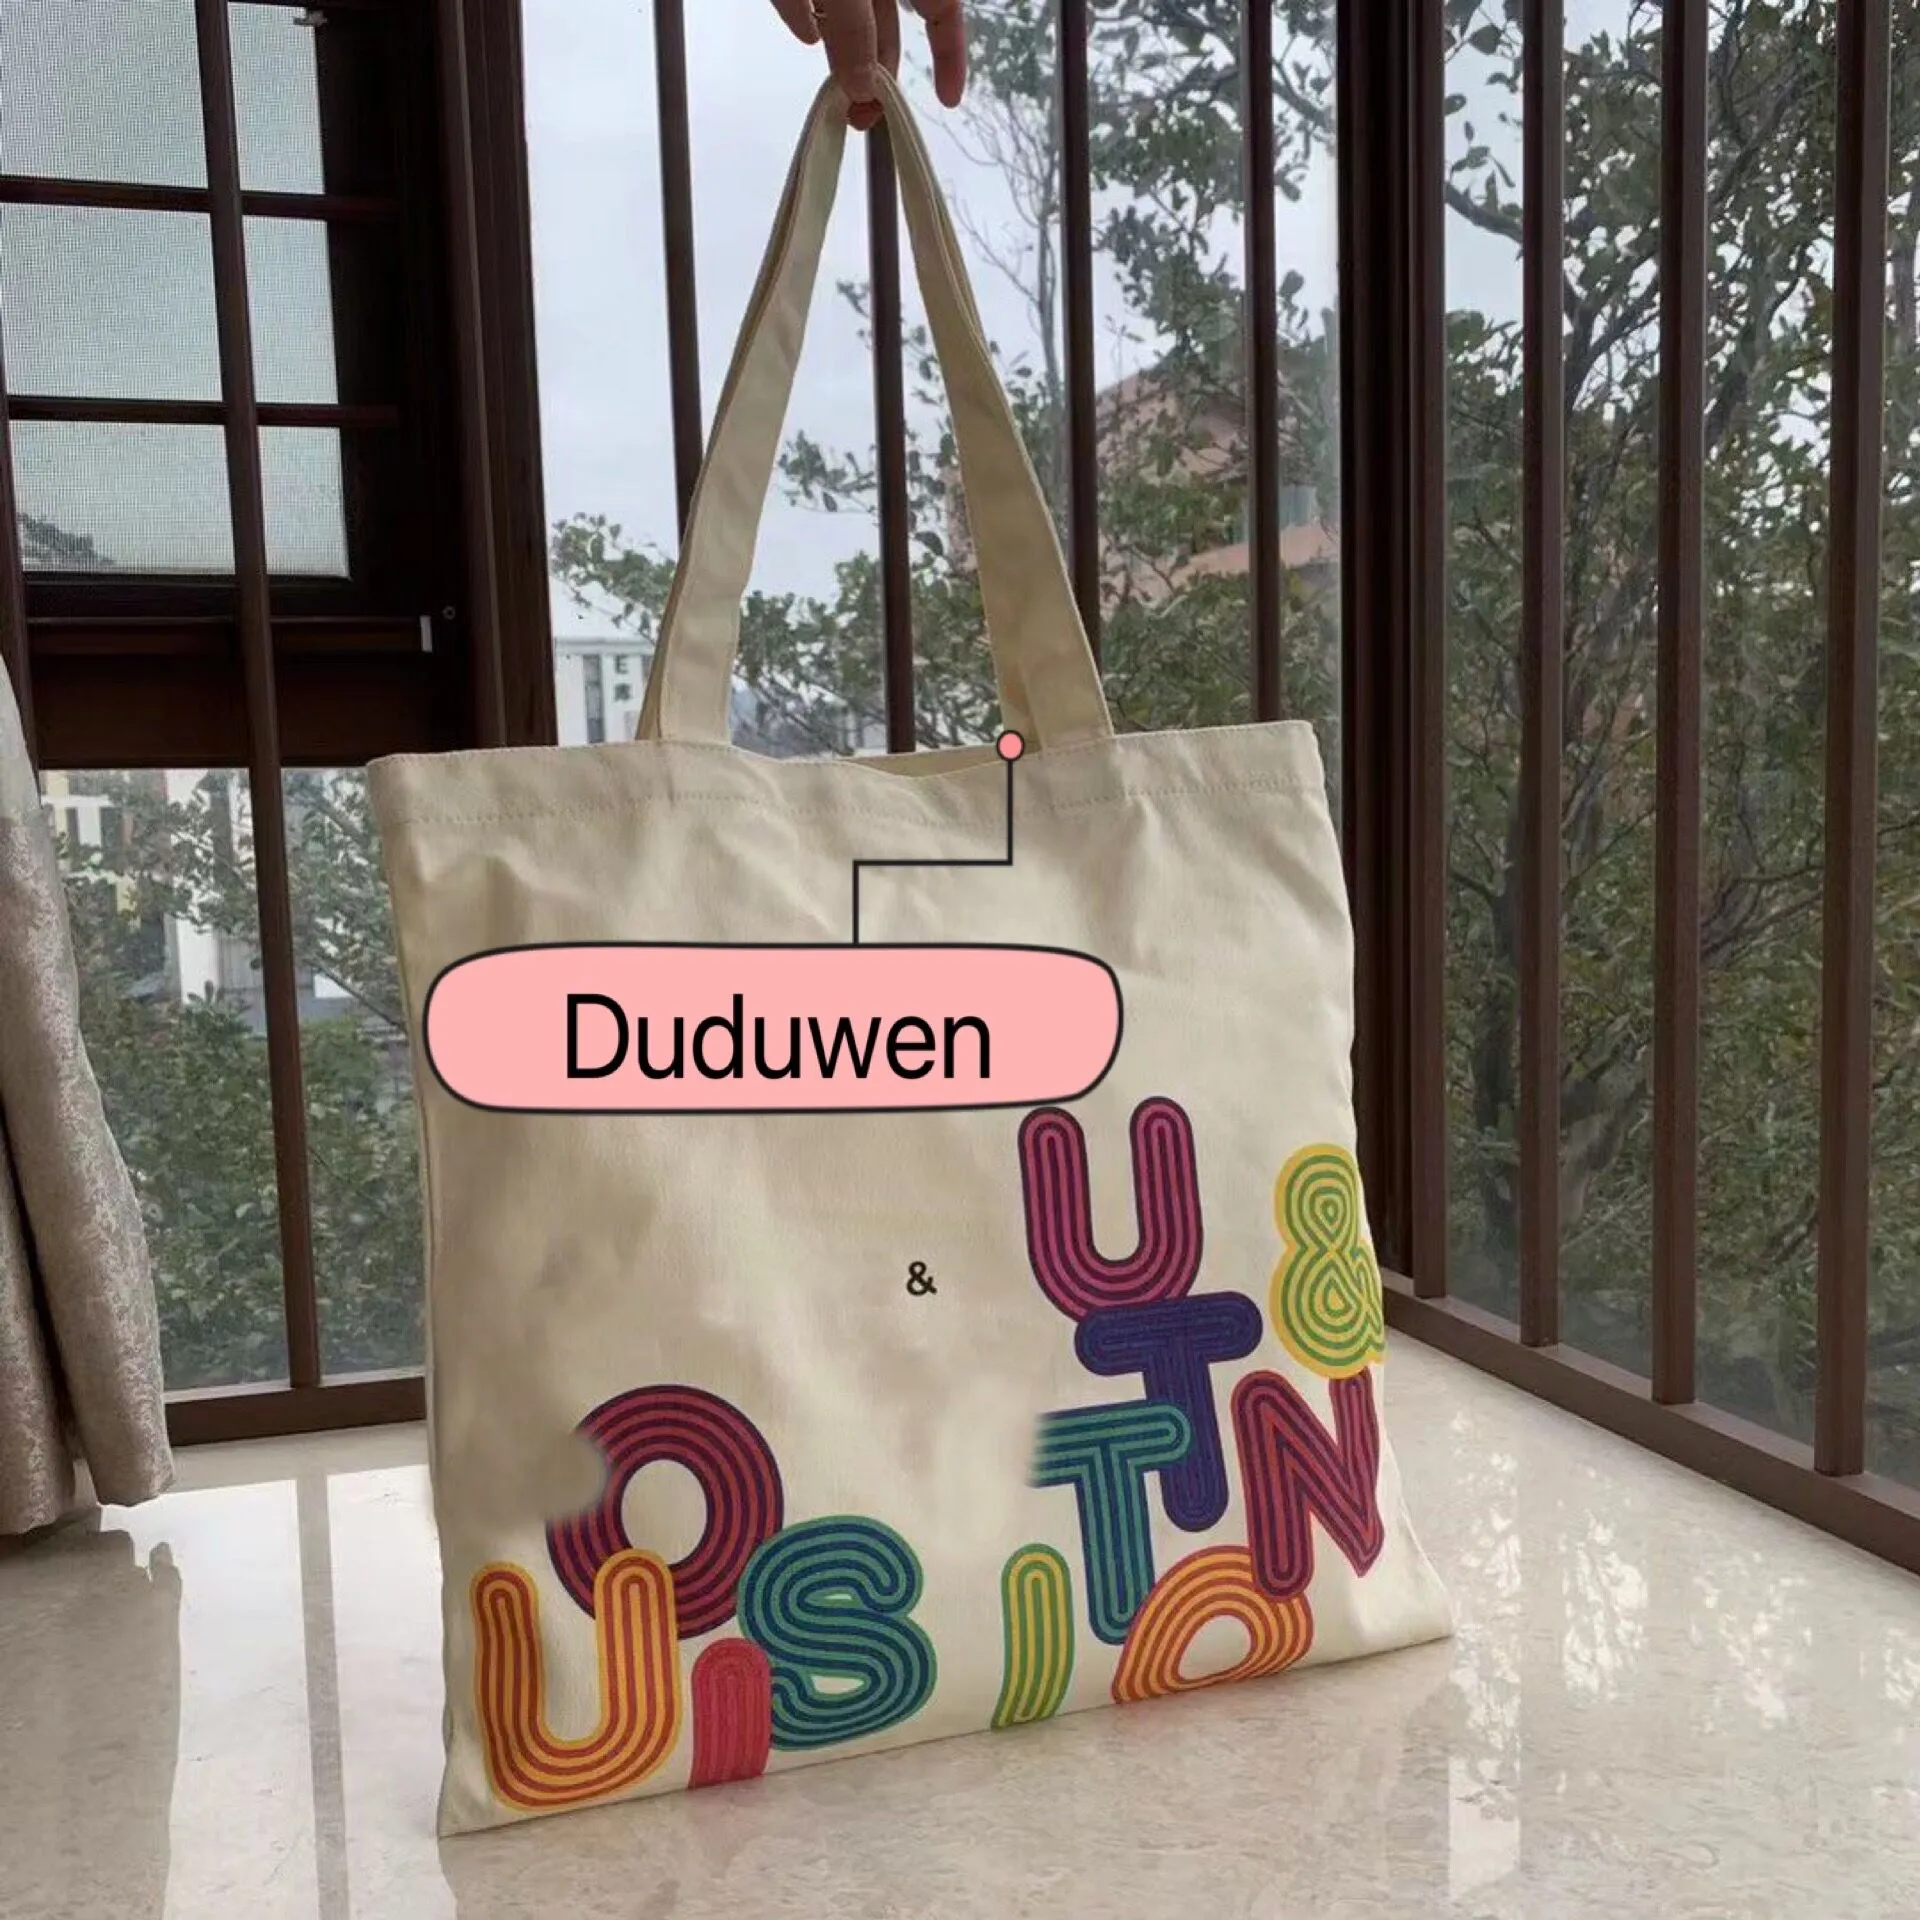 41 5X40CM 25CM handle classic canvas Shopping bag printed fashion beach Travel tote Wash Bags rinted letters Cosmetic Storage Case243g